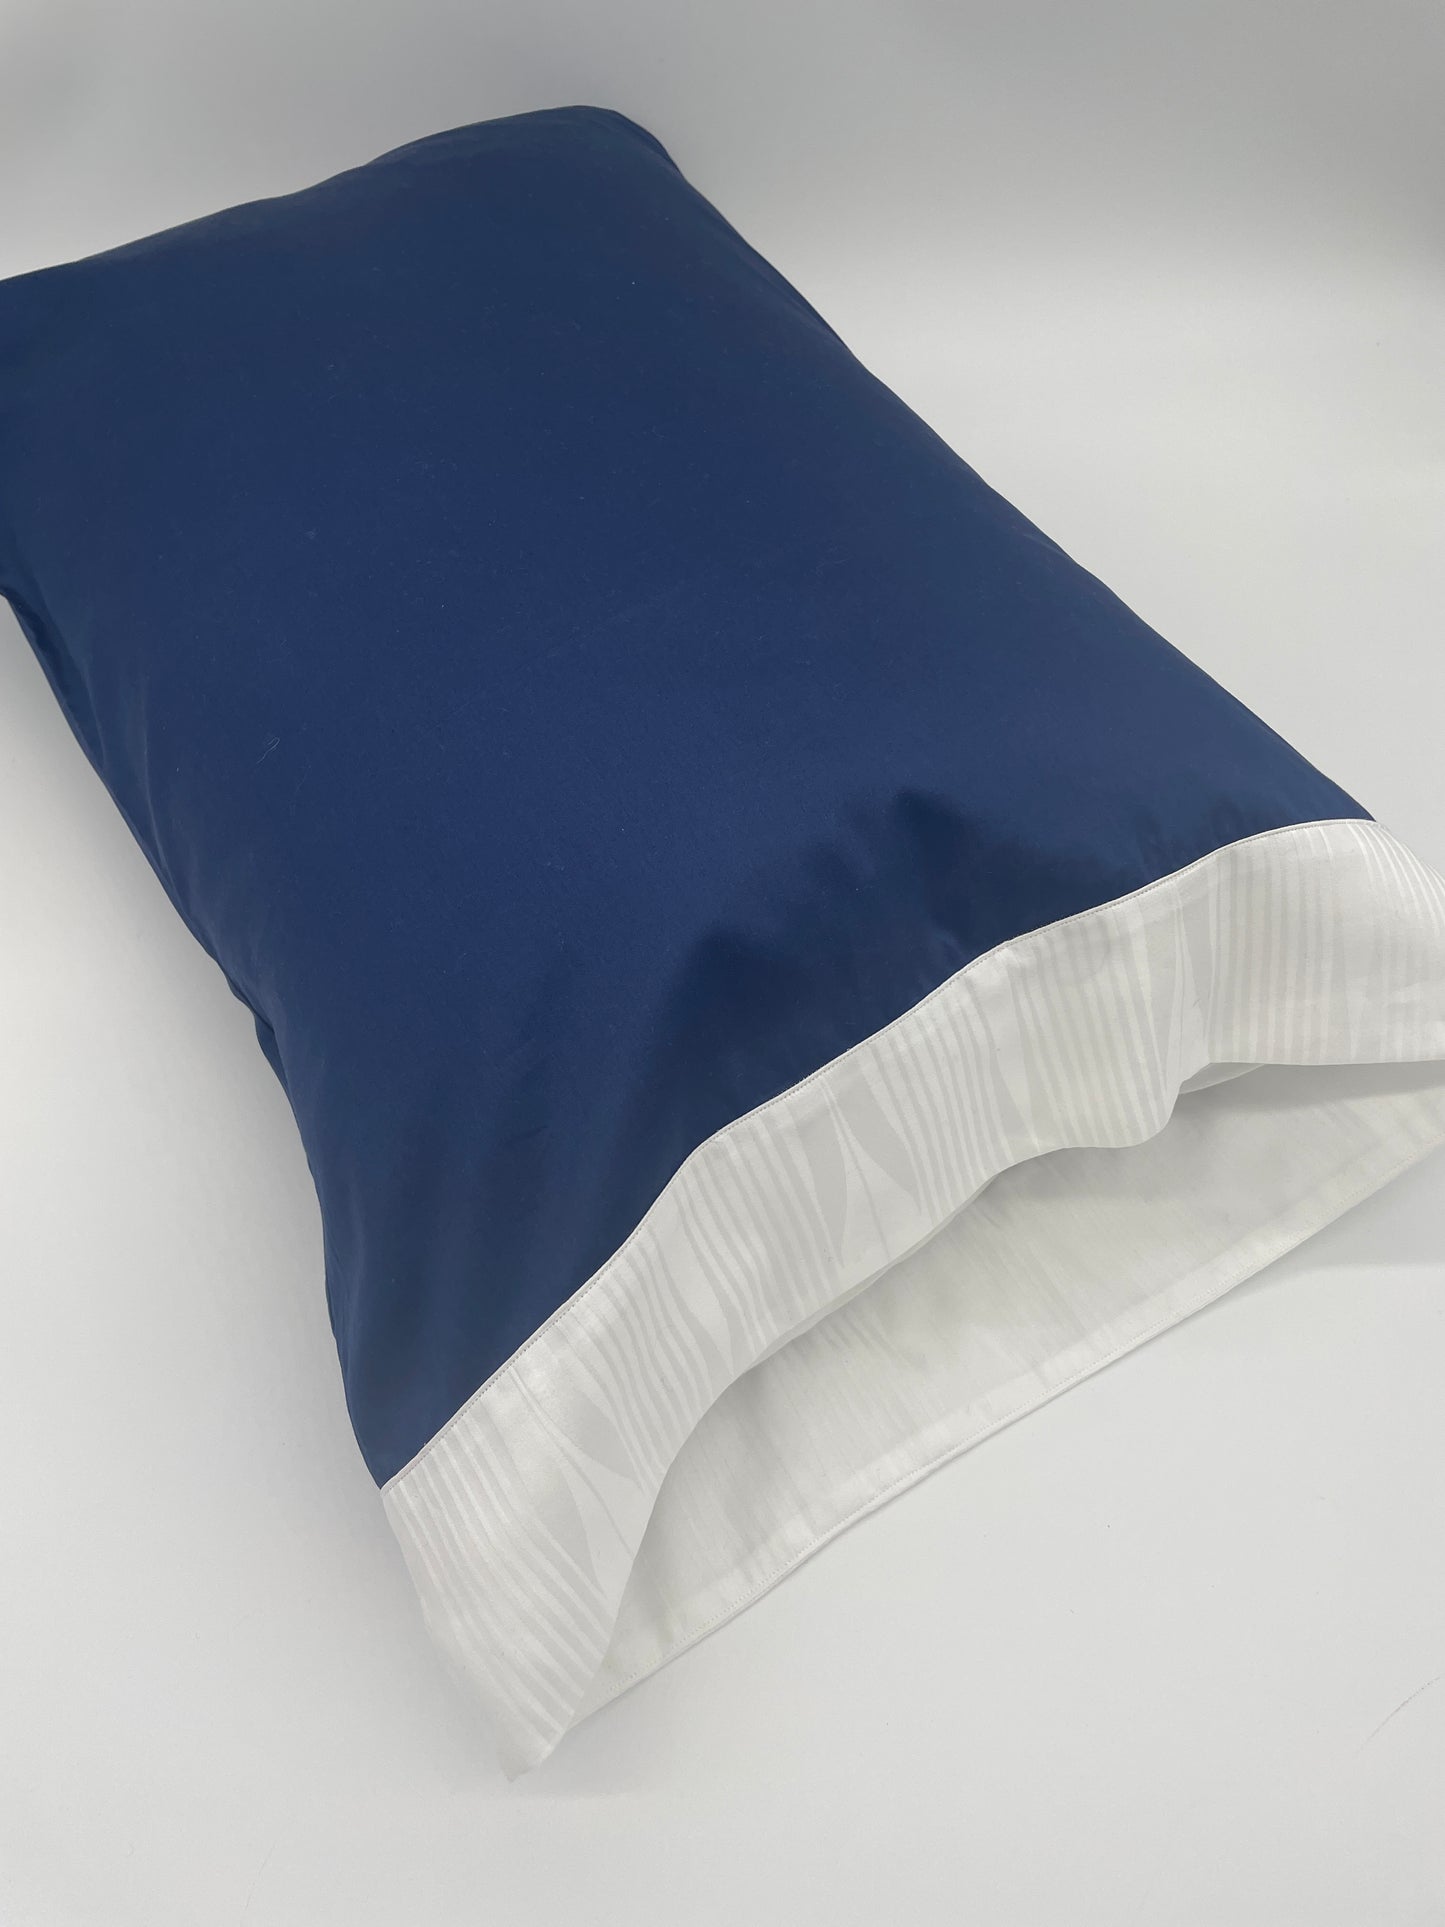 Kearsley Pillowcase on pillow.  Navy Soleil 300 thread count Sateen with a white on white Soleil jacquard border (Soleil is an abstracted sun ray jacquard border in white on white).  Made in Italy.  Fine linens.  Daily Essentials.